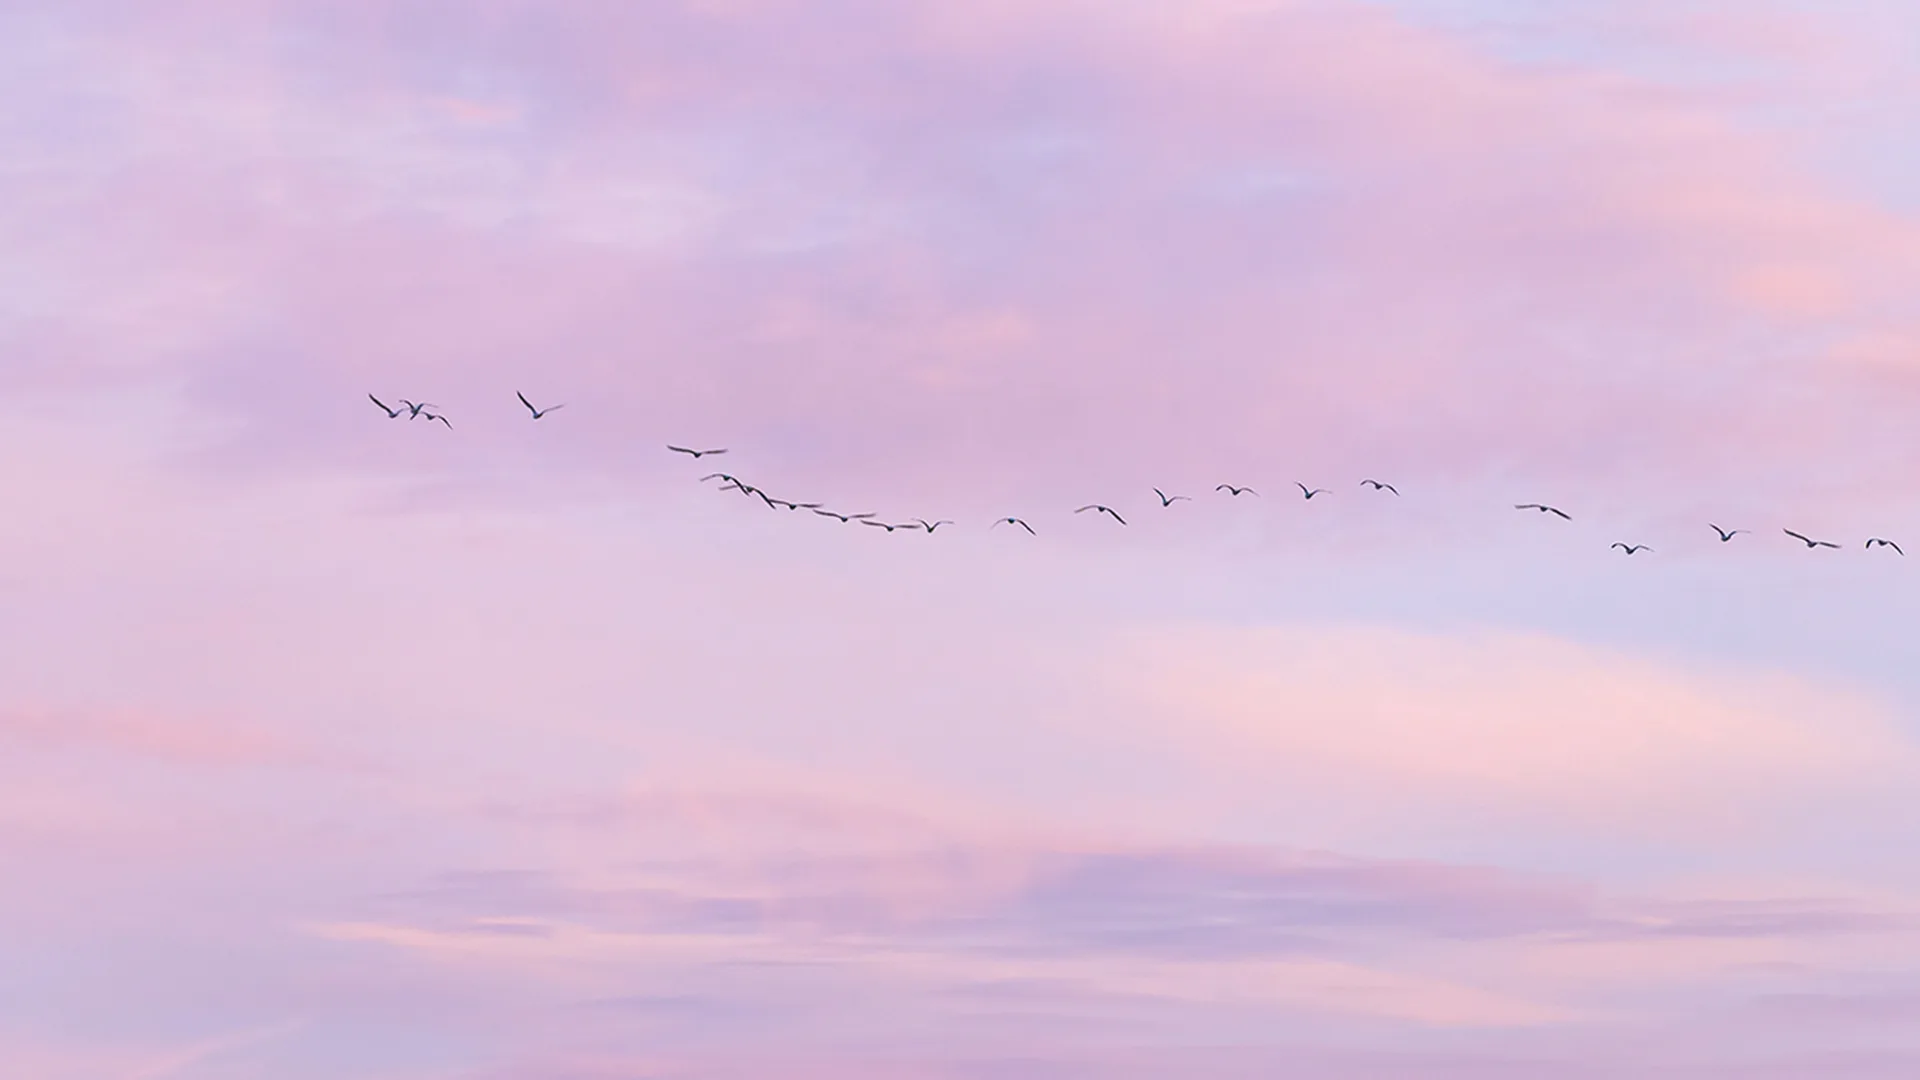 Pink and purple cloudy sky with birds